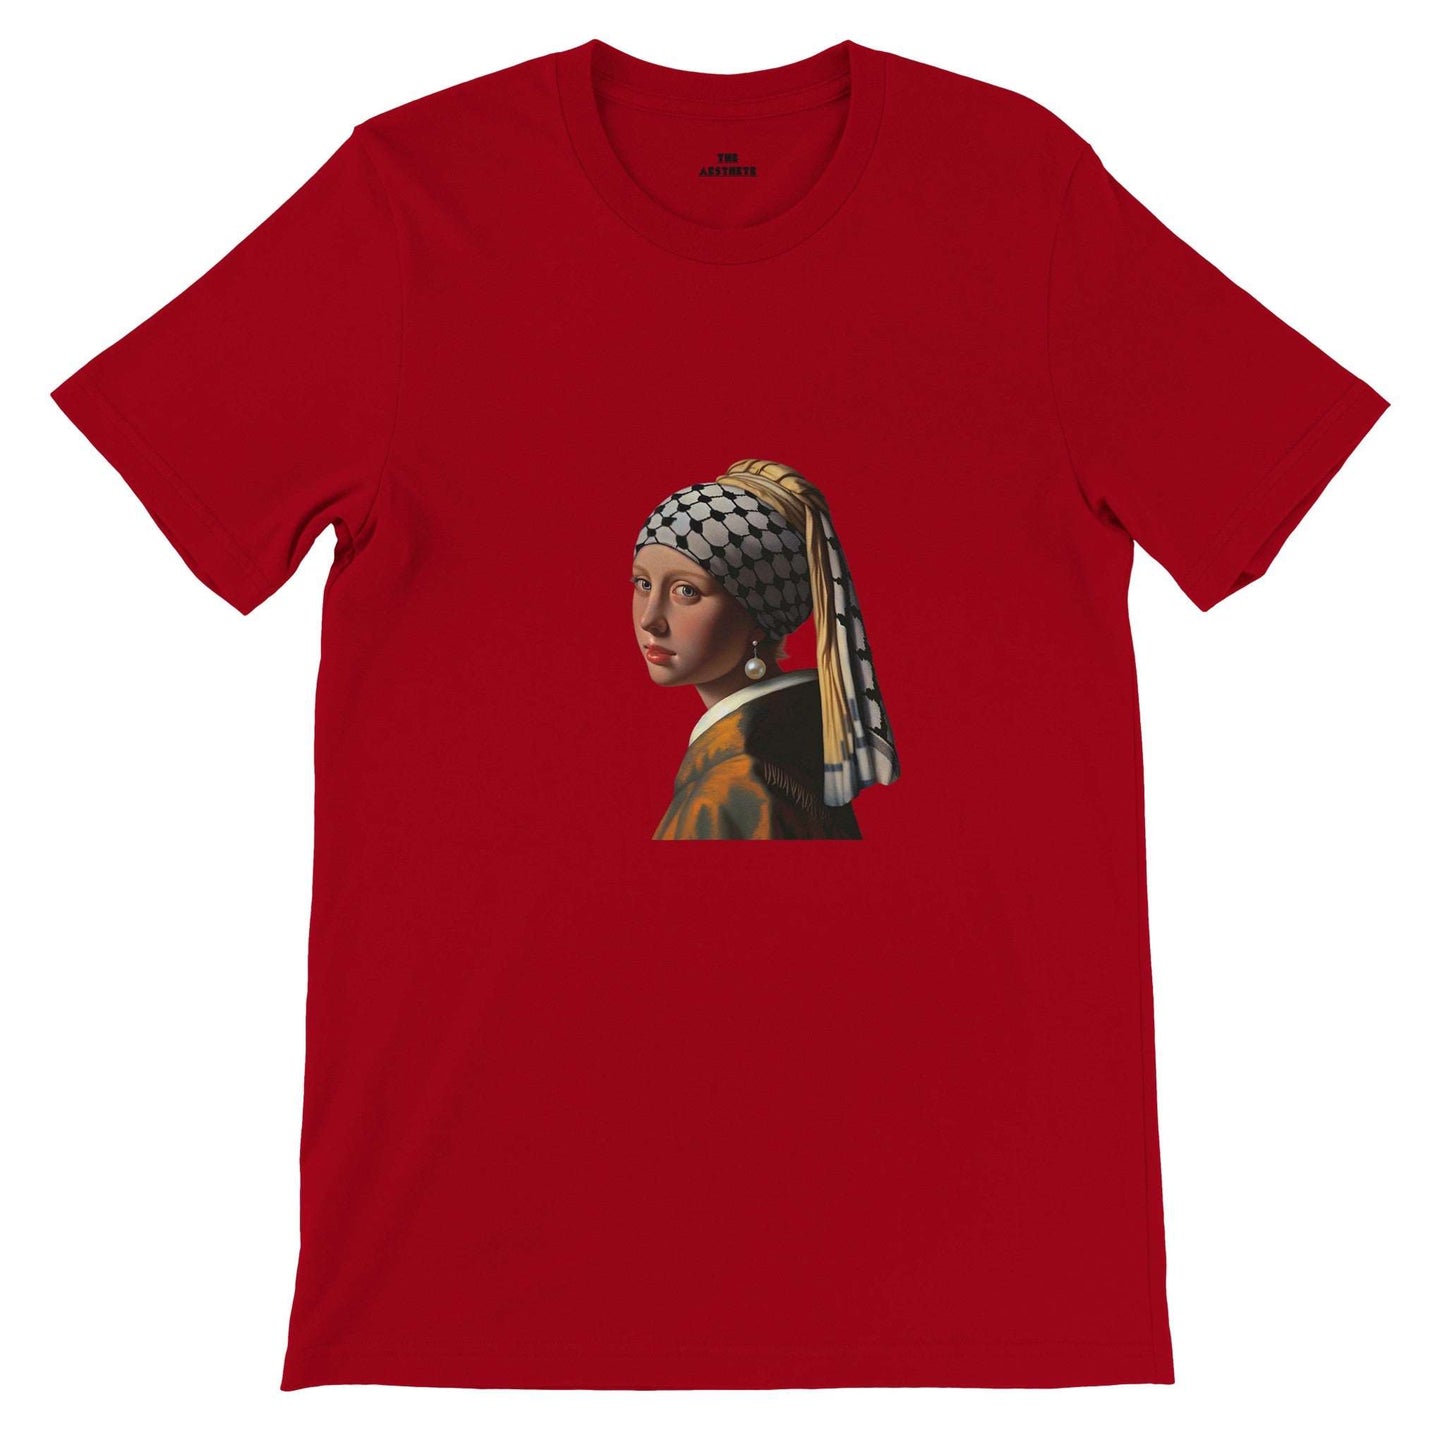 “Girl With a Pearl Earring and a Keffiyeh” T-Shirt, Sweatshirt, and Zipped-Hoodie - Art for Palestine Collection